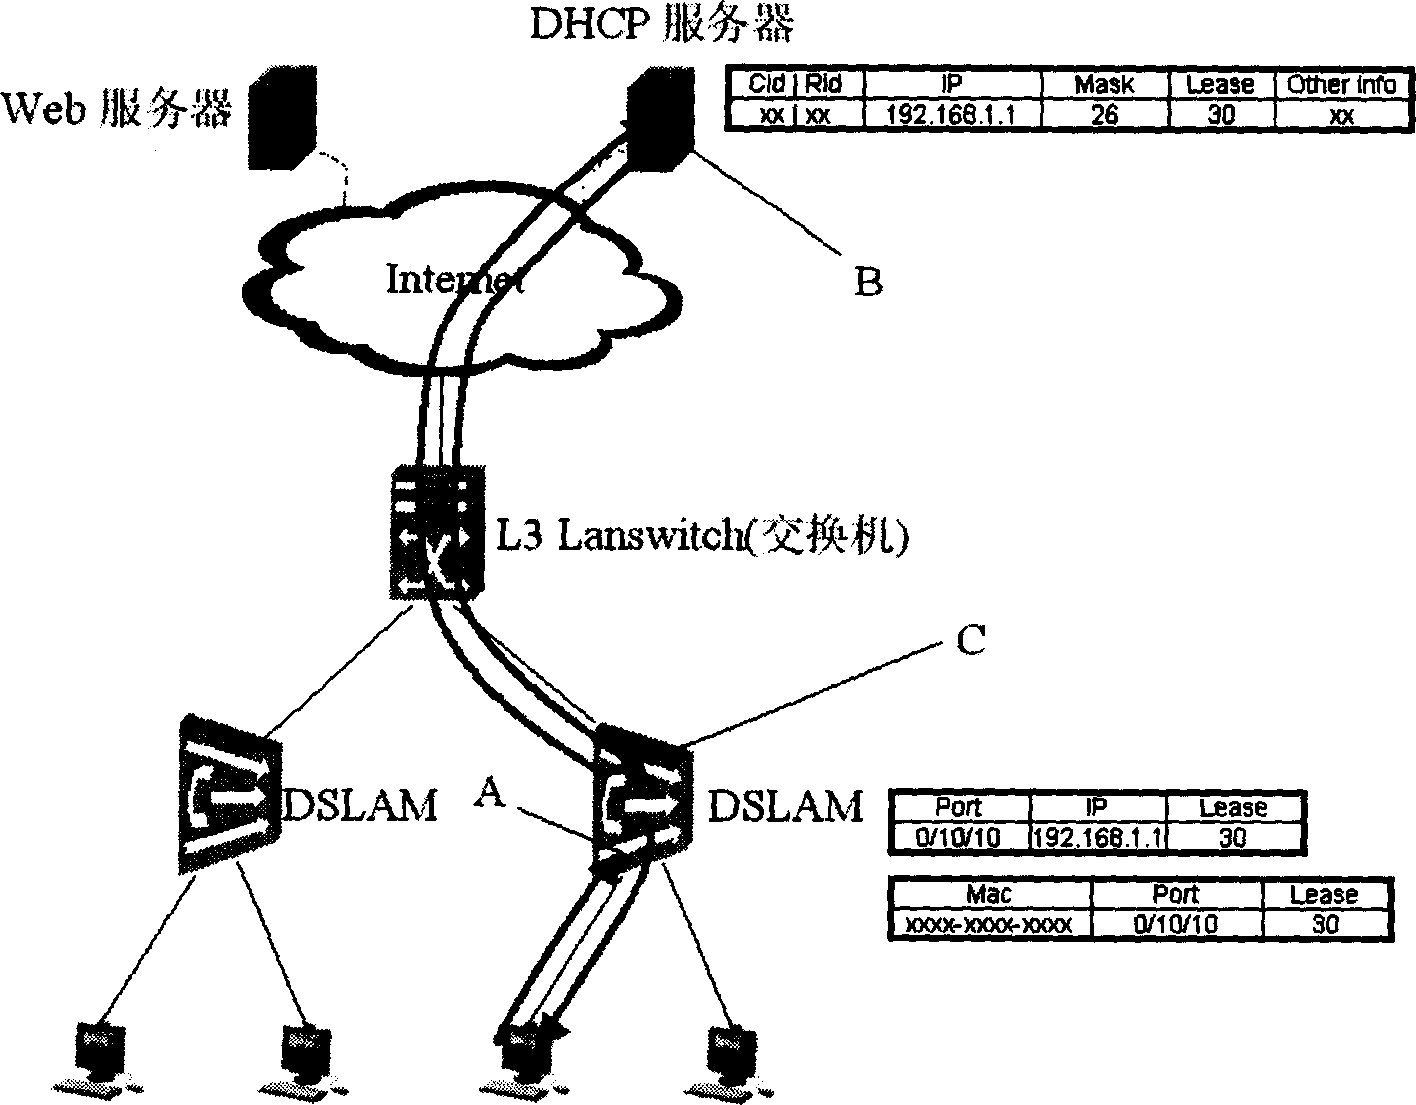 Method for securing special line user access network